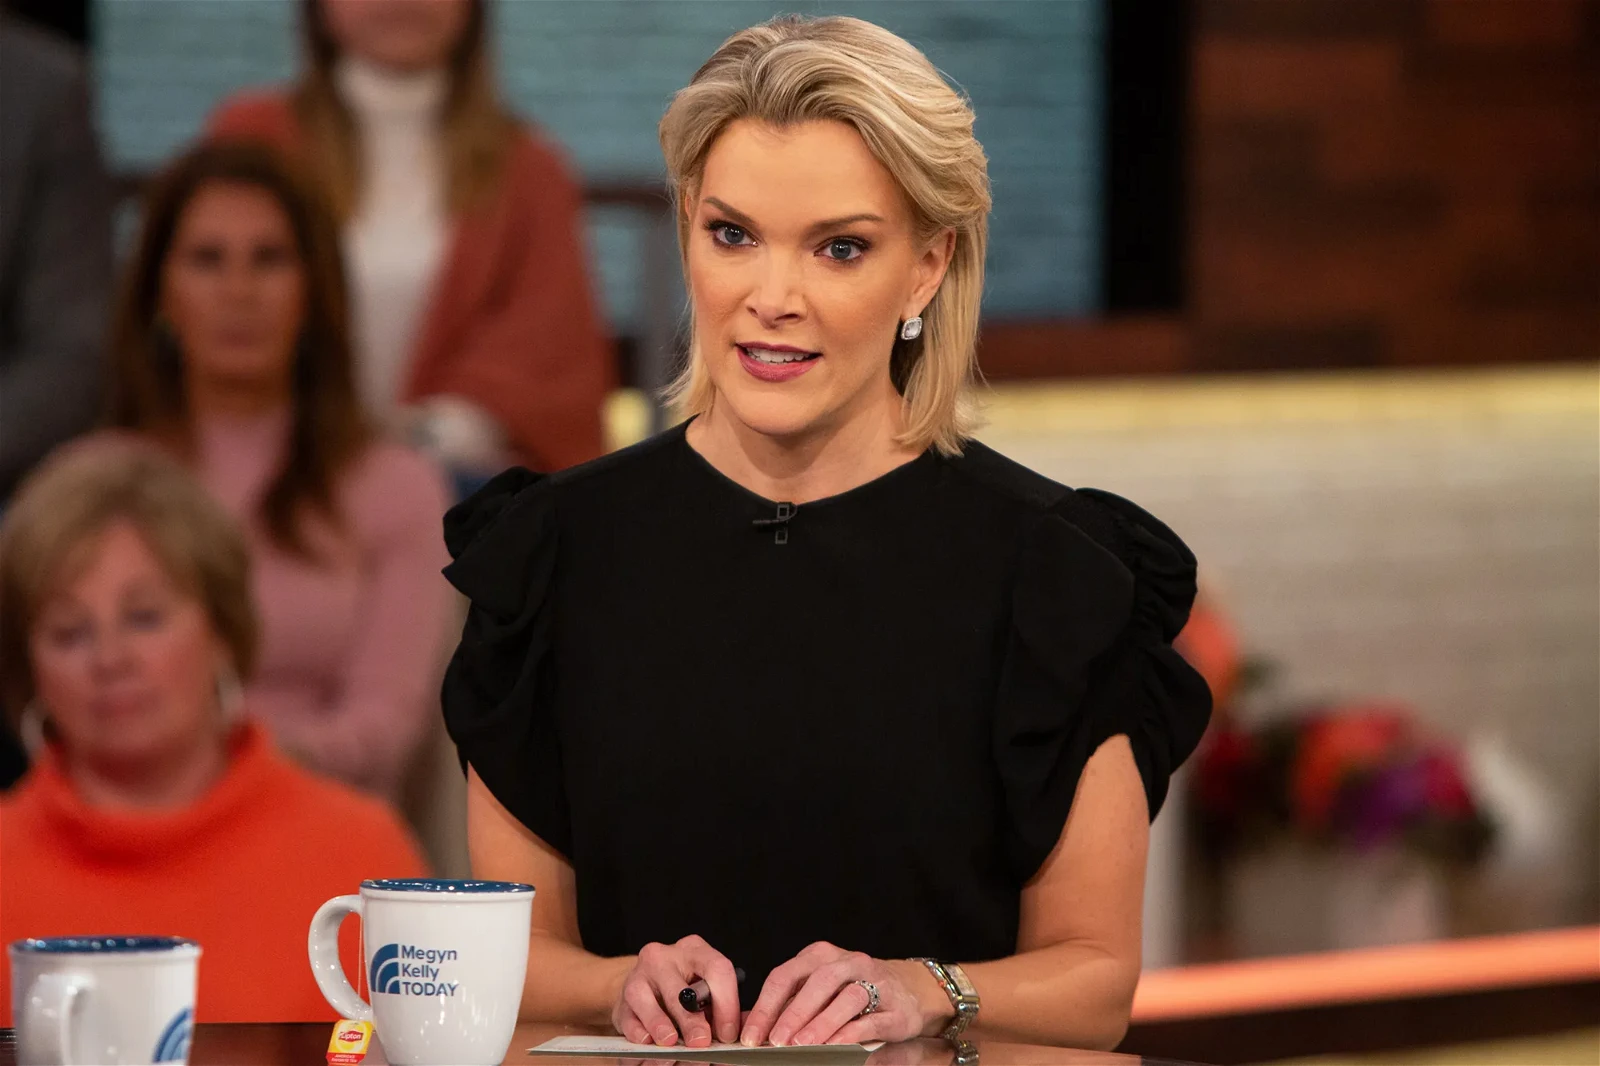 Megyn Kelly apologized for her insensitive comments